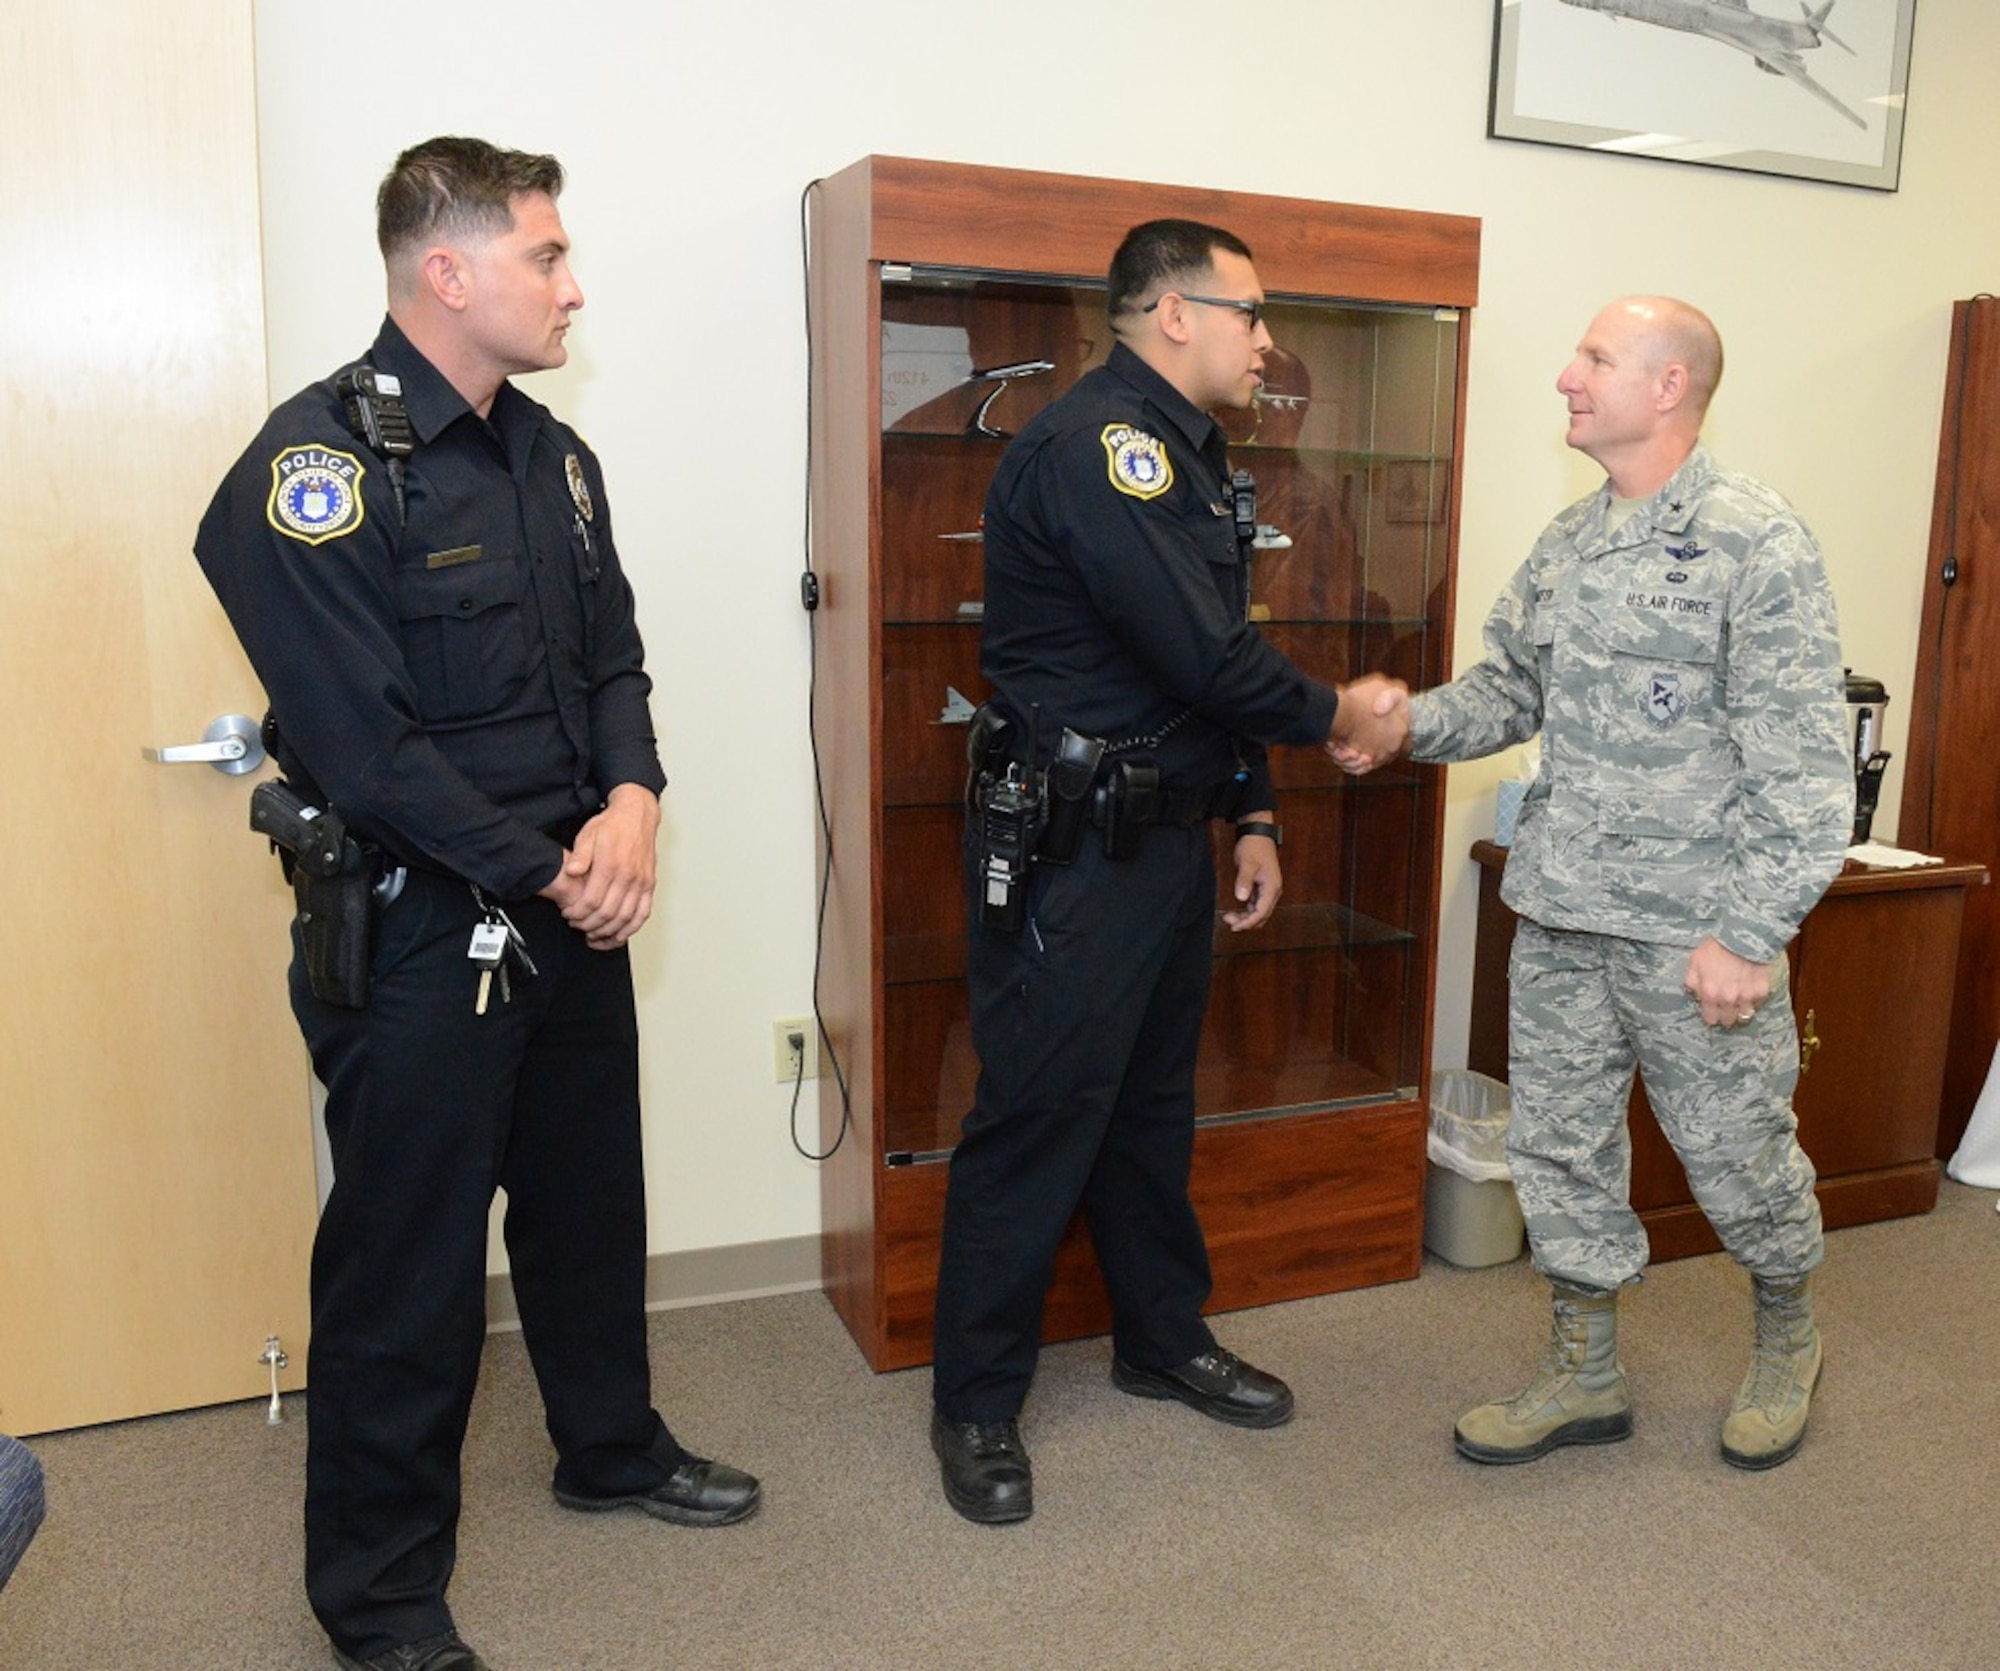 From right to left: Brig. Gen. Carl Schaefer, 412th Test Wing commander, presents Officers Randy Plata and Miguel Madrid test wing coins May 22 to thank them for actions they took during a “gate runner” incident in April. (U.S. Air Force photo by Kenji Thuloweit)